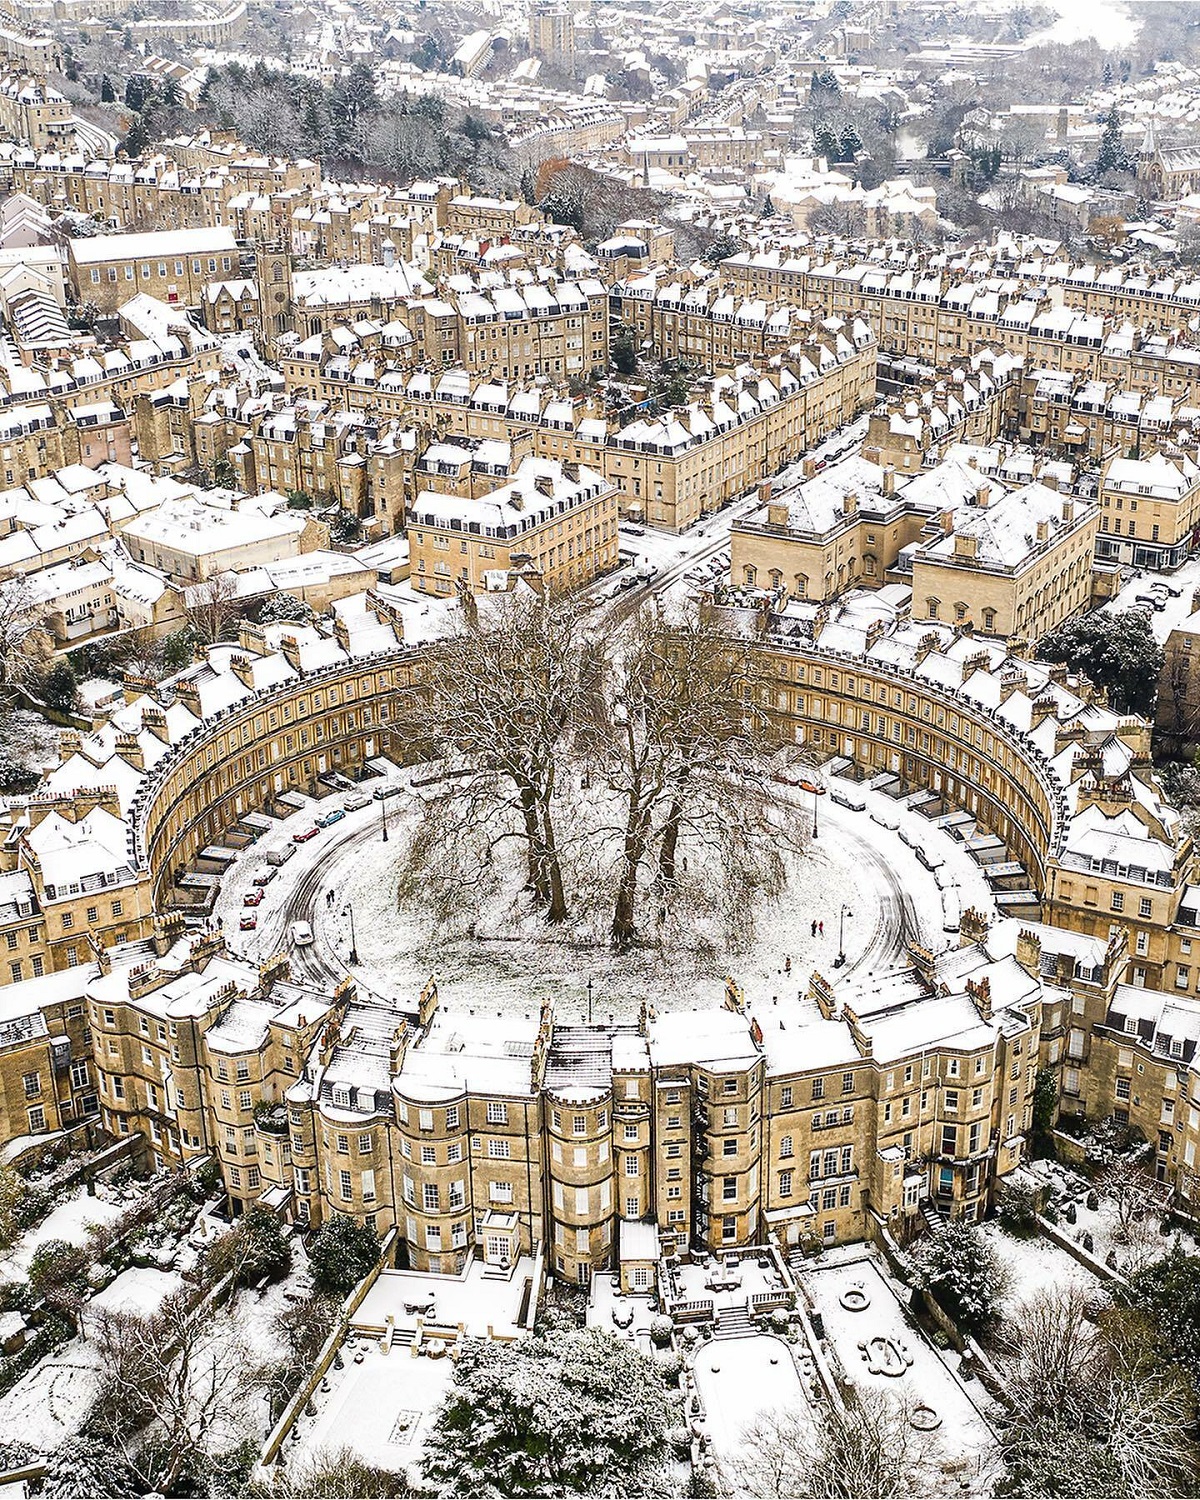 The Circus, A Ring Of 18th Century Large Georgian Townhouses In The Historical City Of Bath, Somerset, England. Designed By Architect John Wood, The Elder